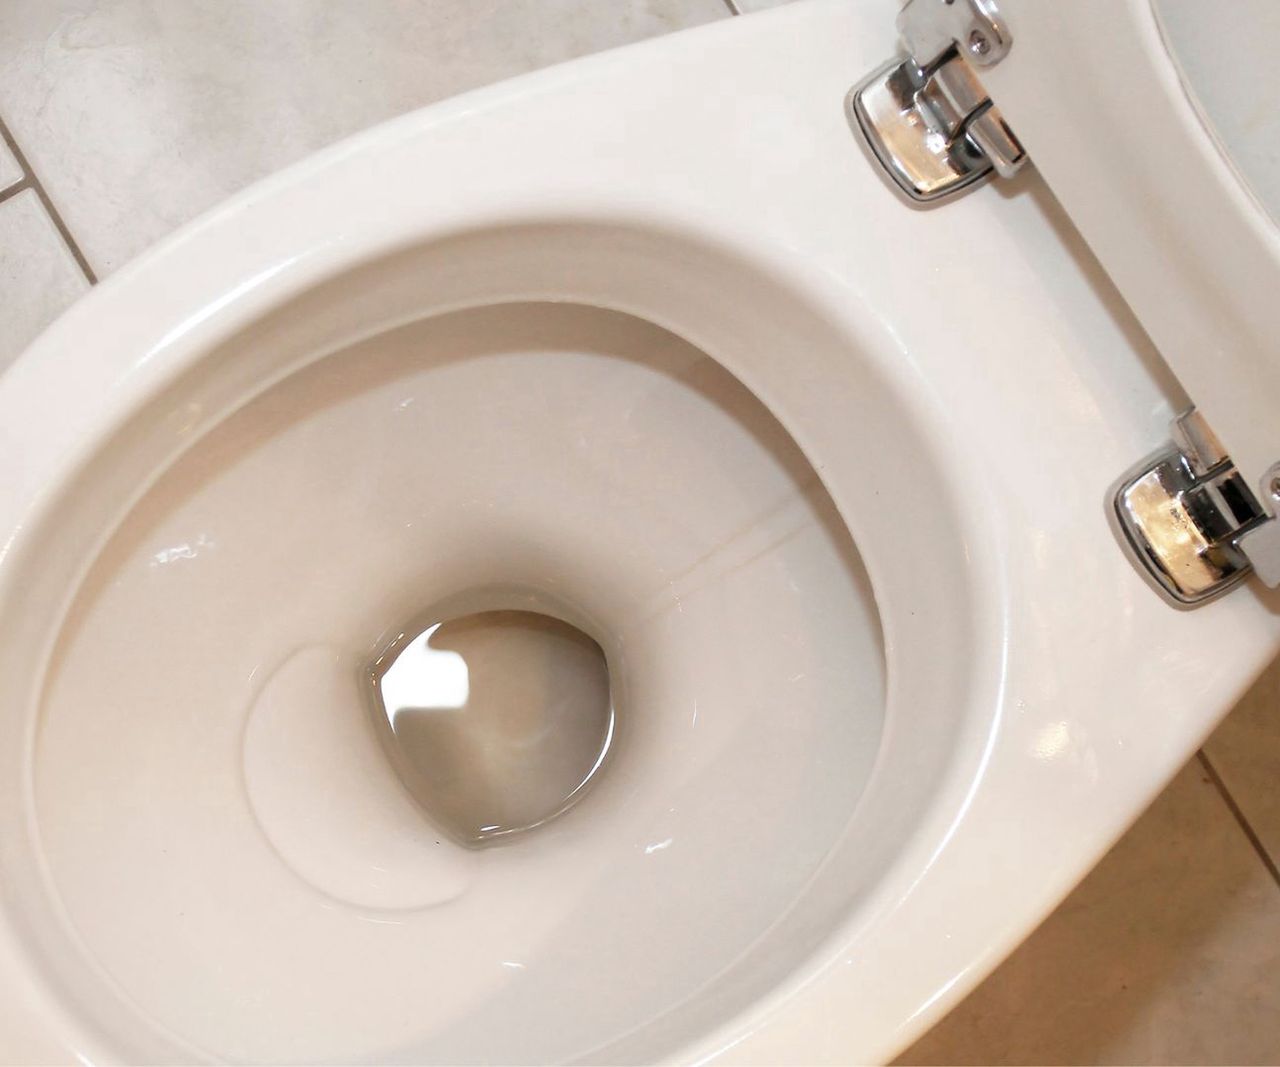 A simple trick to clean the toilet without the need for scrubbing